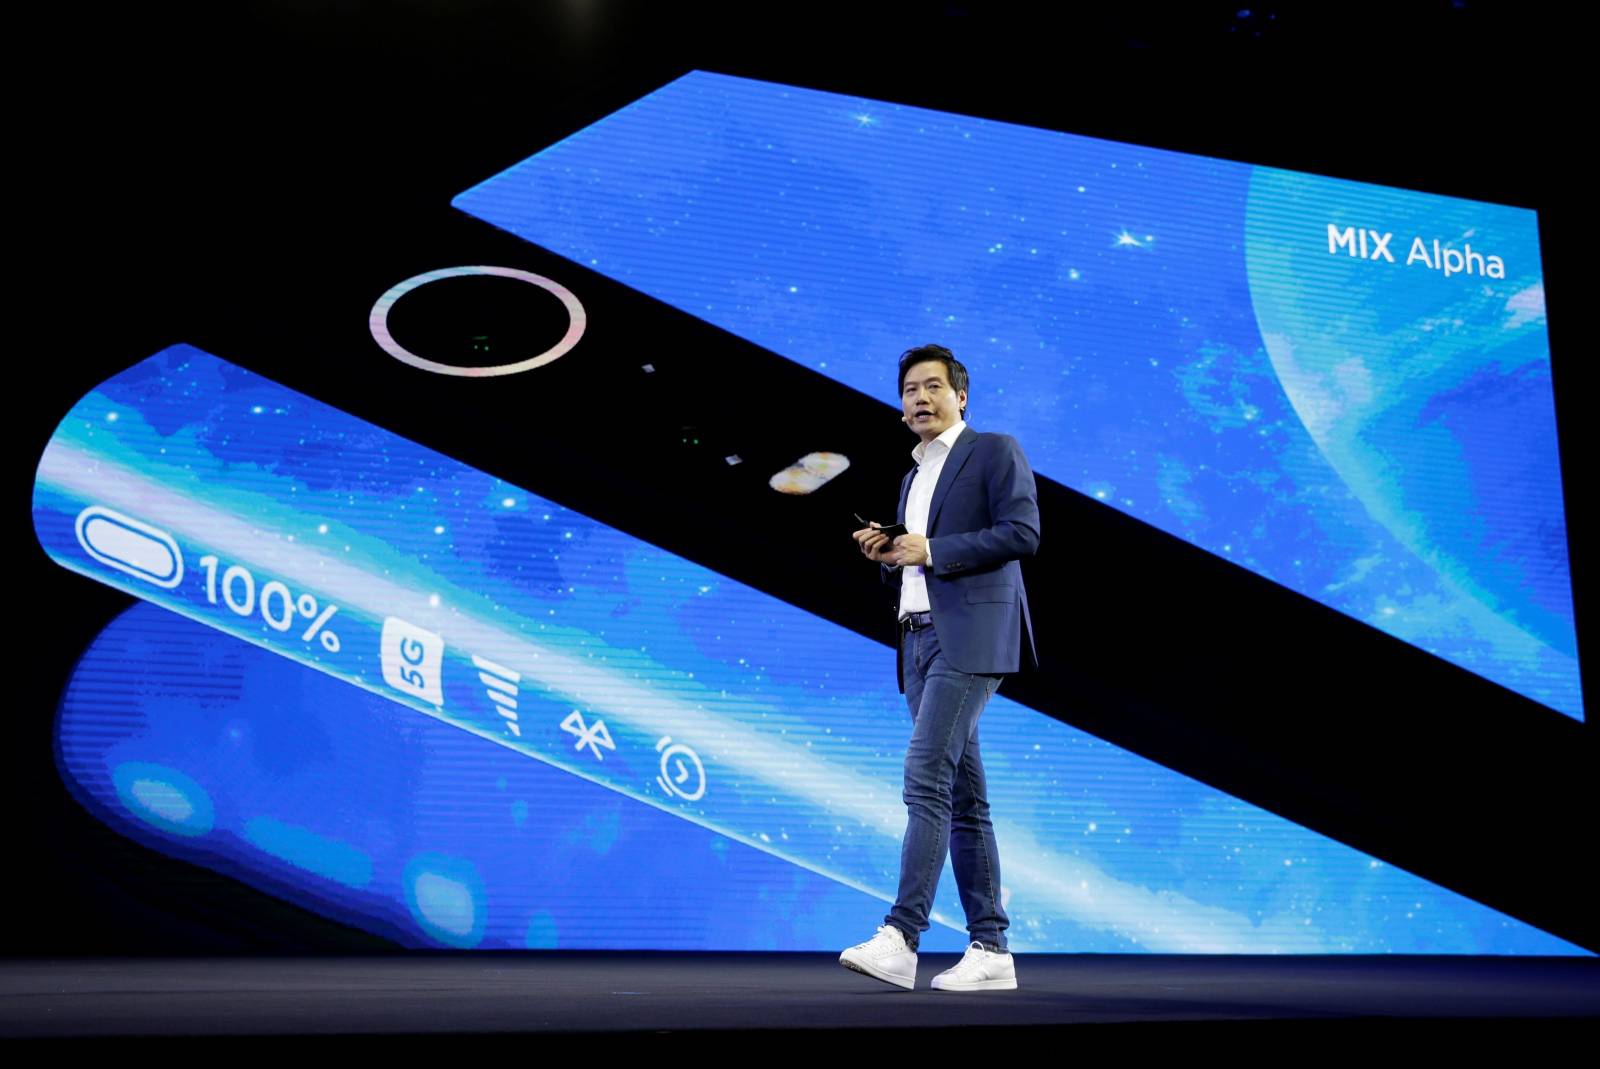 Xiaomi founder and CEO Lei Jun attends a product launch event of Xiaomi Mi MIX Alpha surround display 5G concept smartphone in Beijing